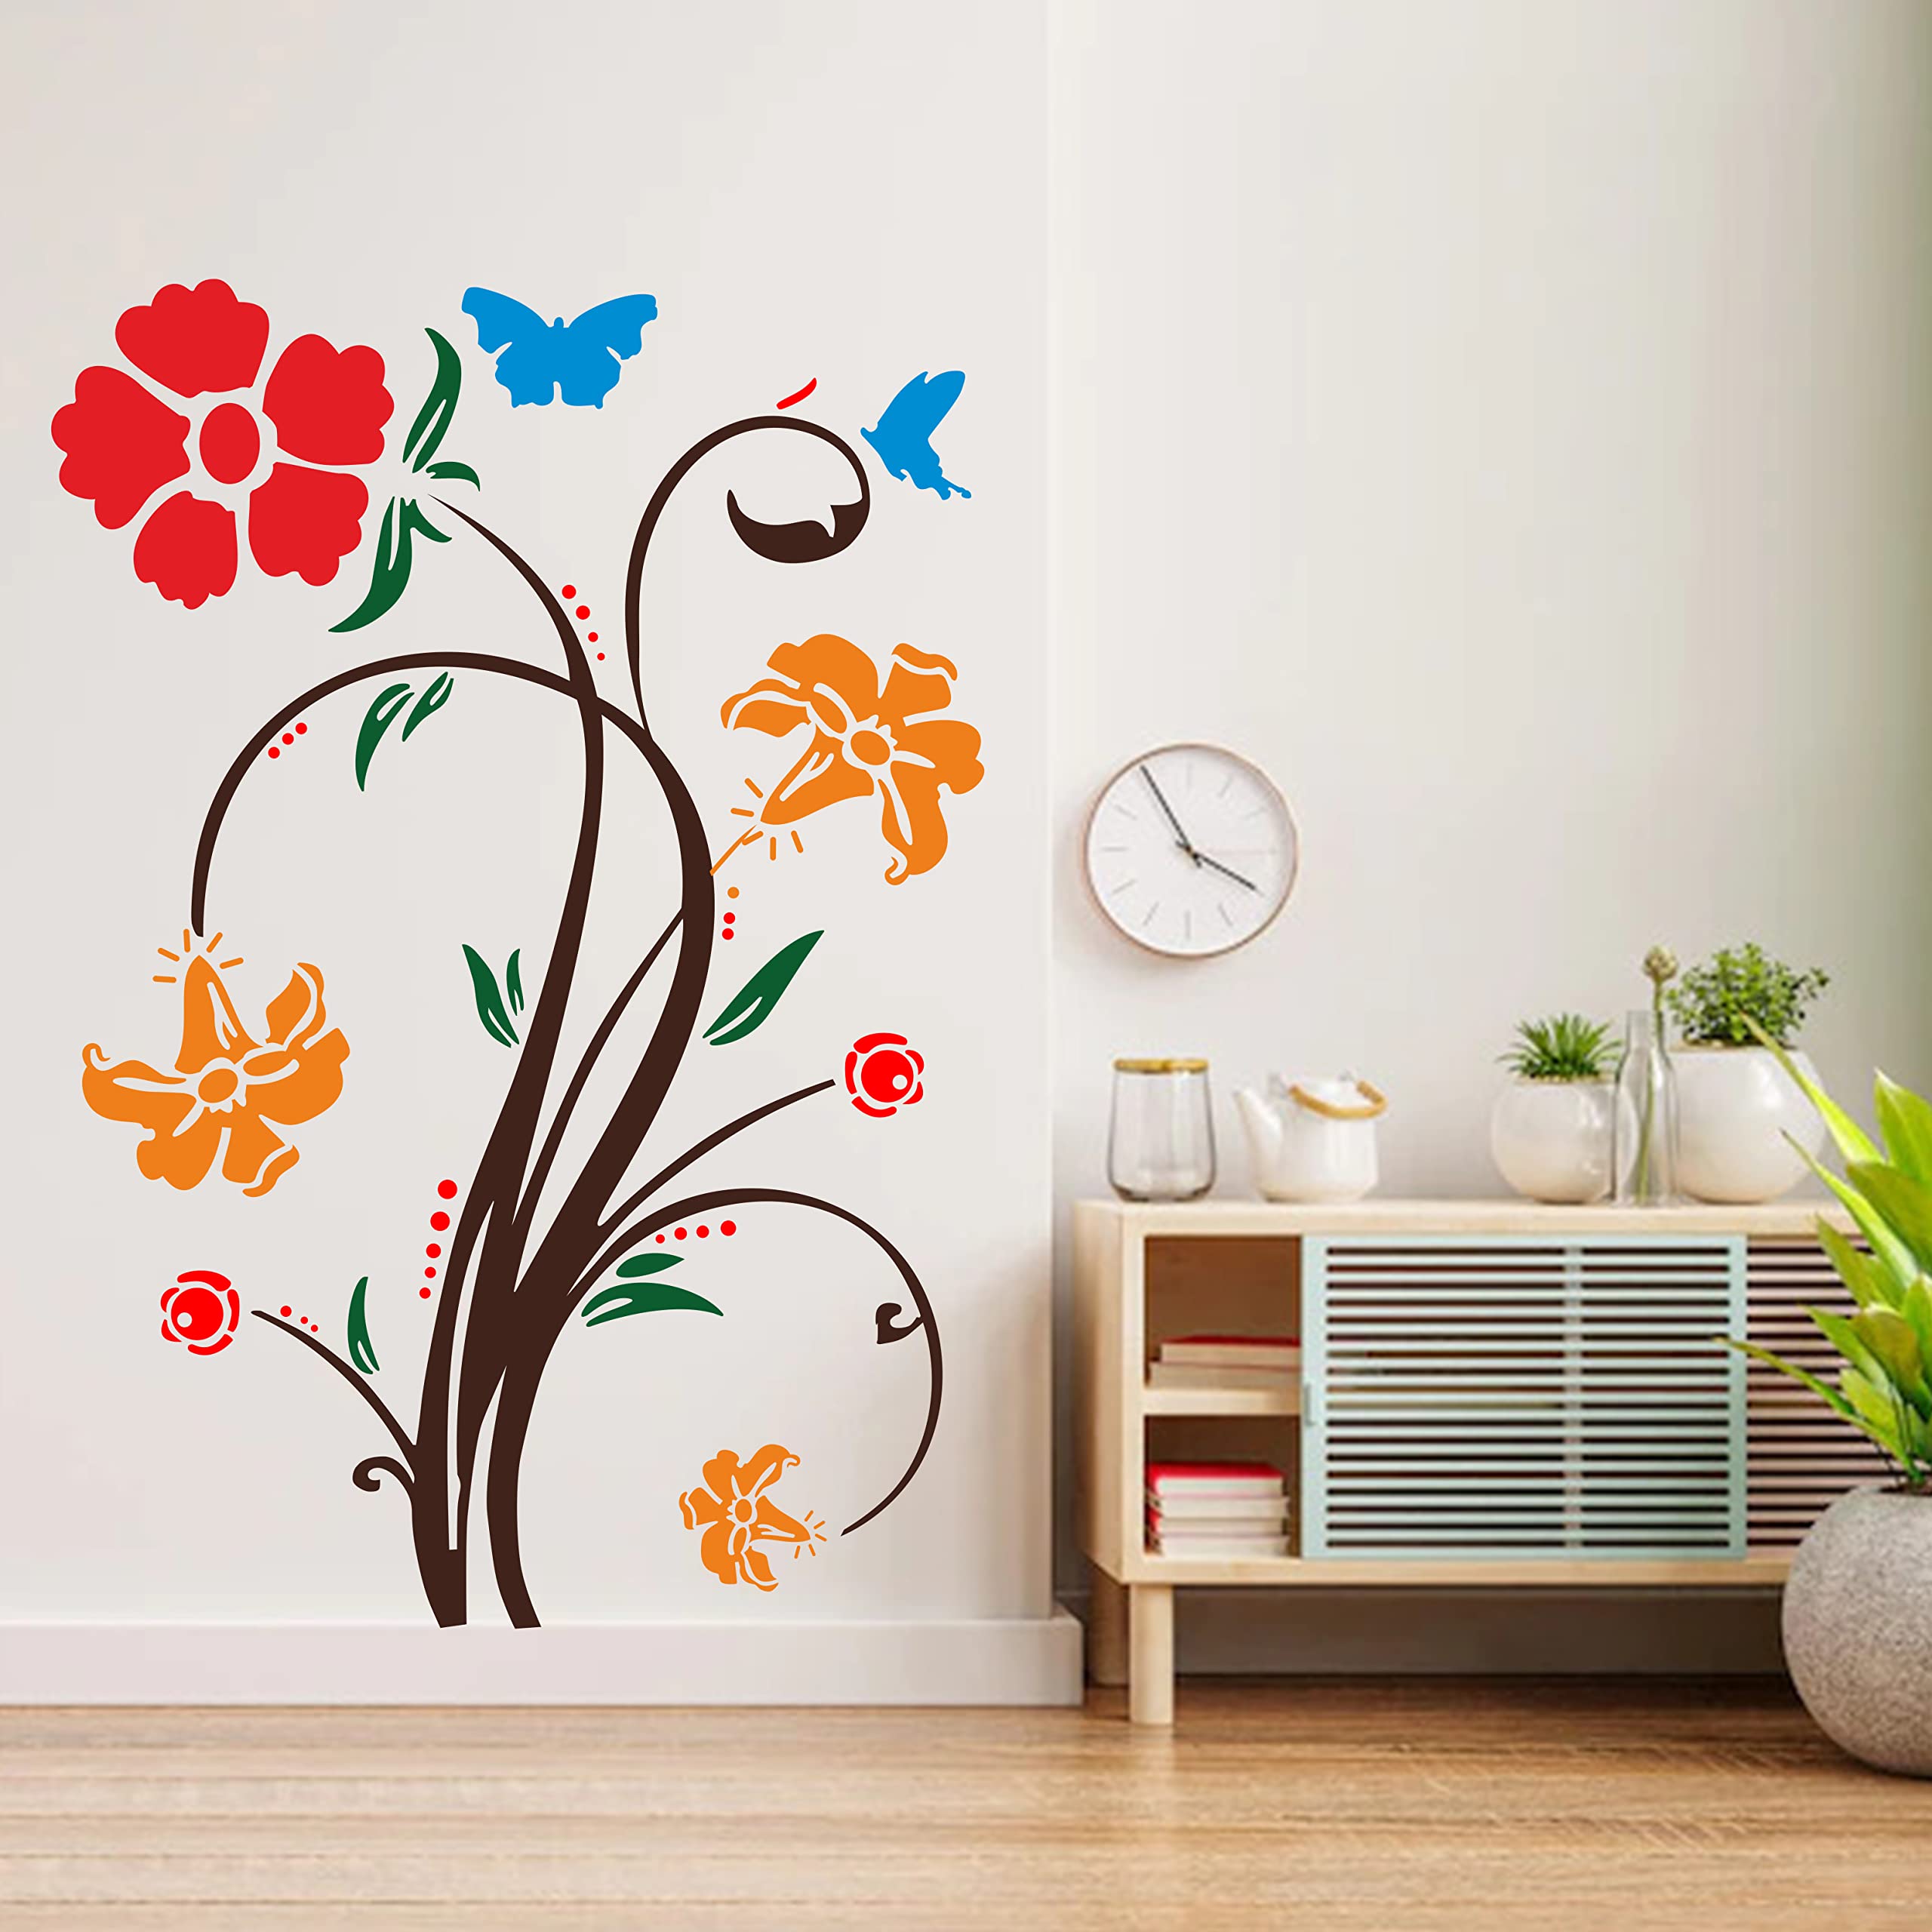 25 Latest Wall Paint Ideas and Designs With Photos in 2023 - KnockFor